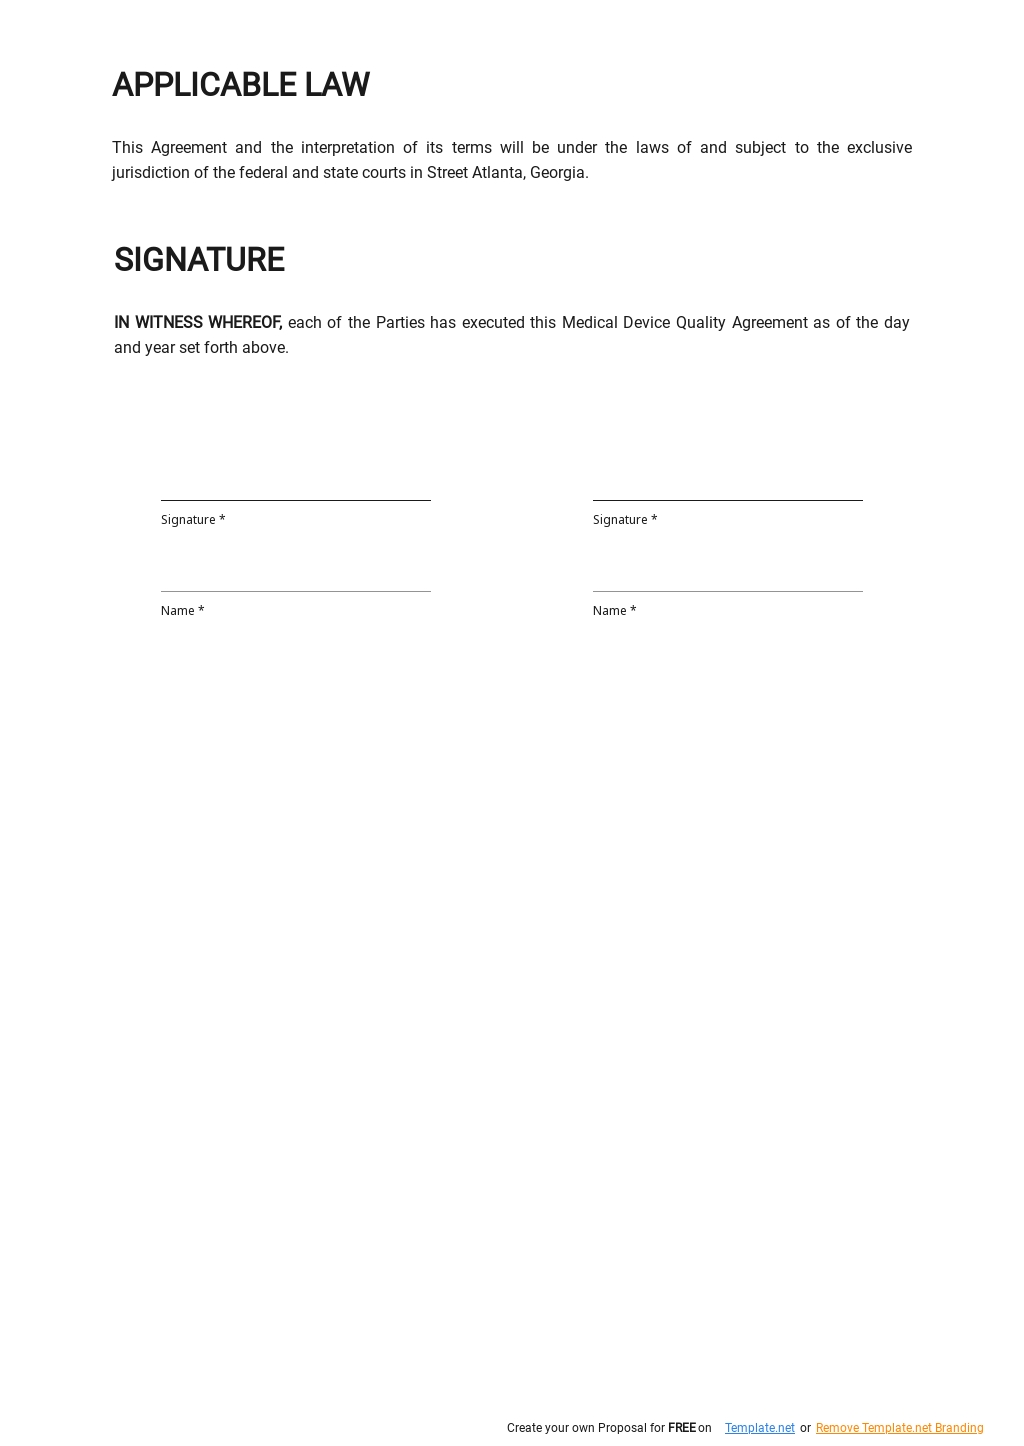 Medical Device Quality Agreement Template 2.jpe